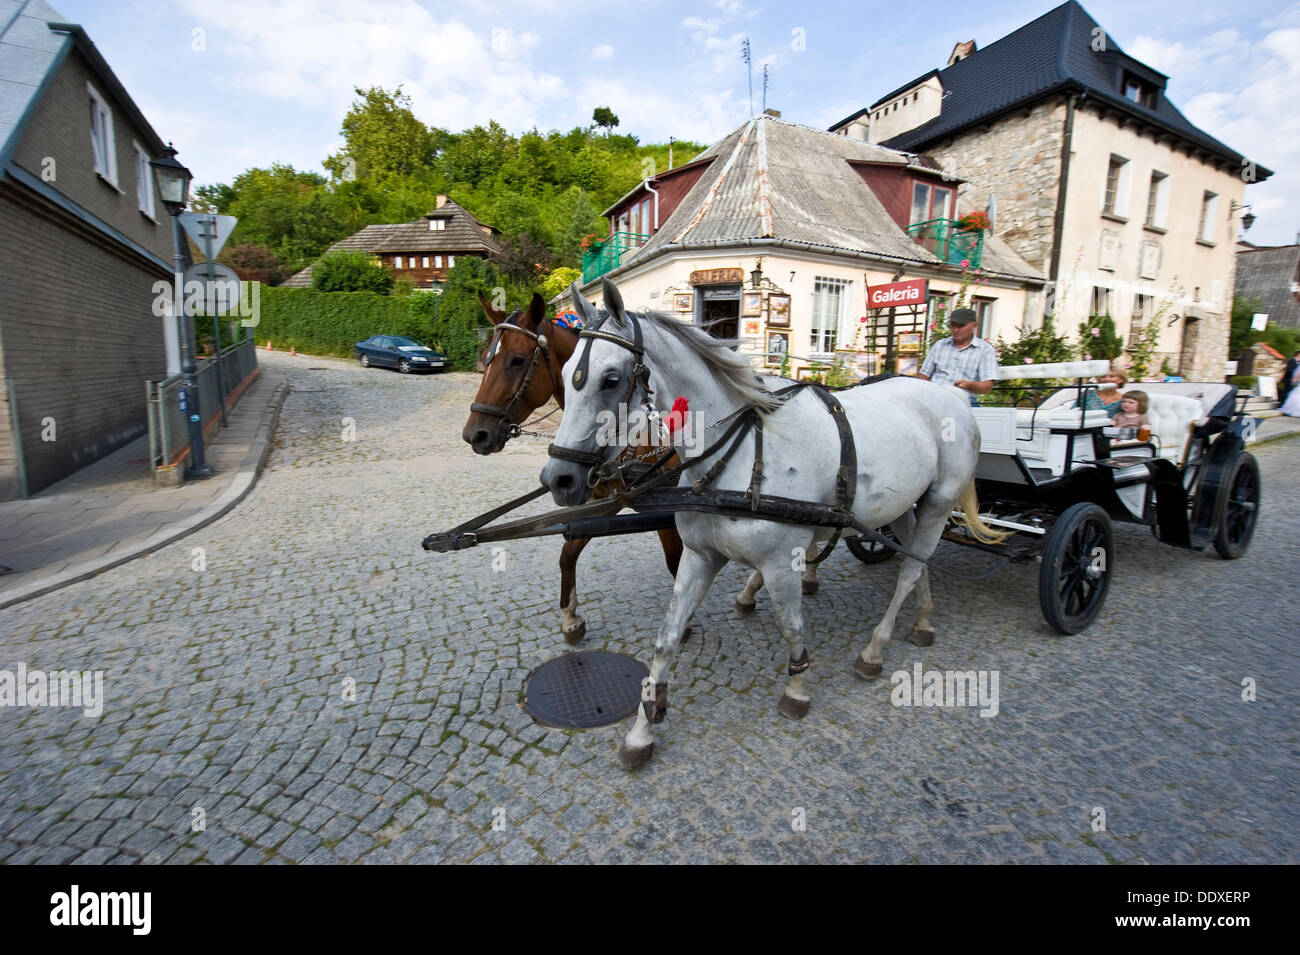 A horse-drawn carriage for sightseeing tourists in Kazimierz Dolny. Stock Photo